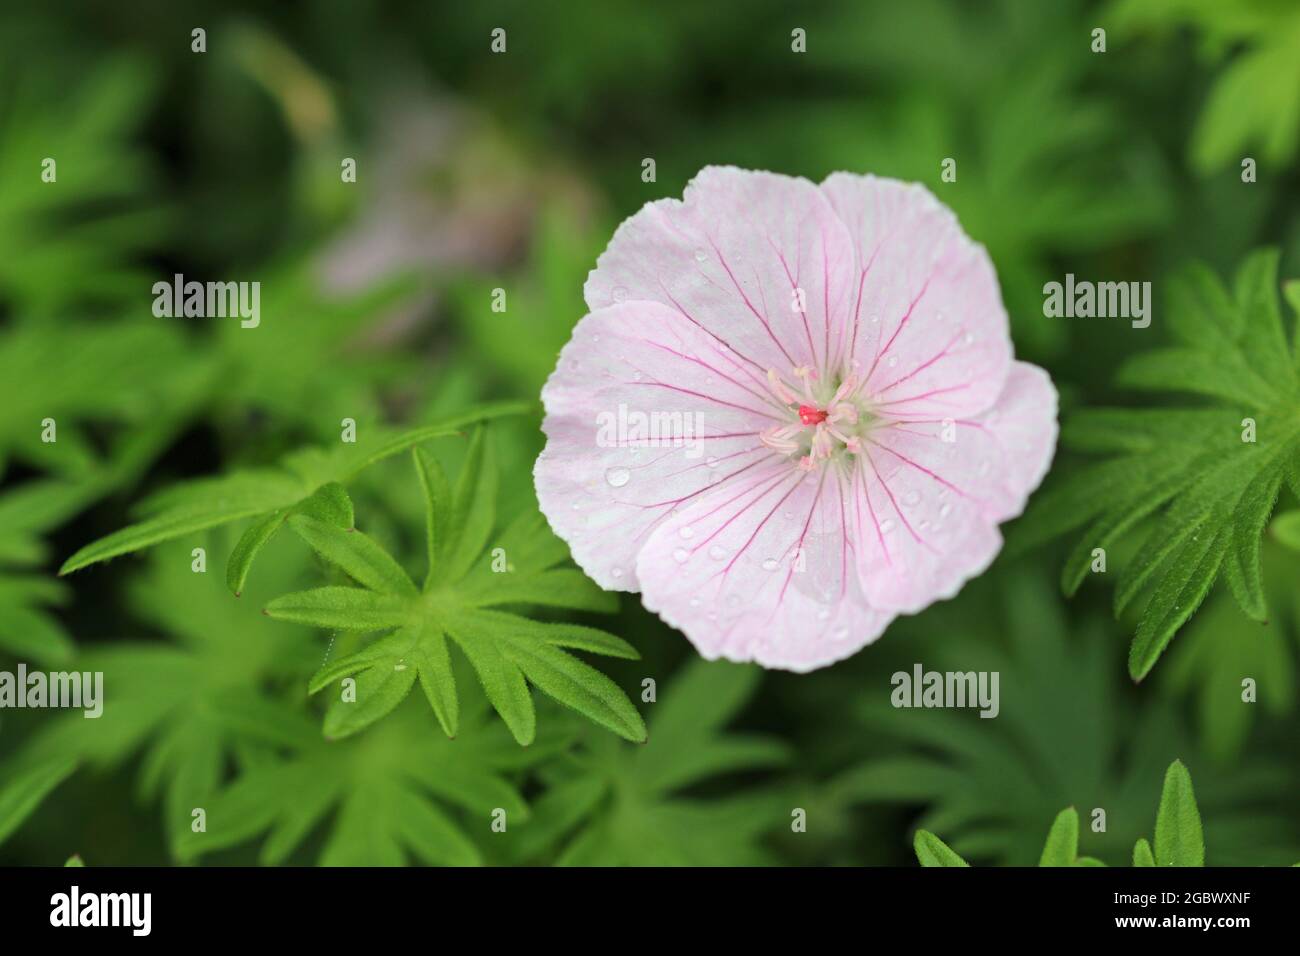 Pink bloody cranesbill, Geranium sanguineum variety striatum Splendens, flower close up with raindrops on the petals and a background of blurred leave Stock Photo